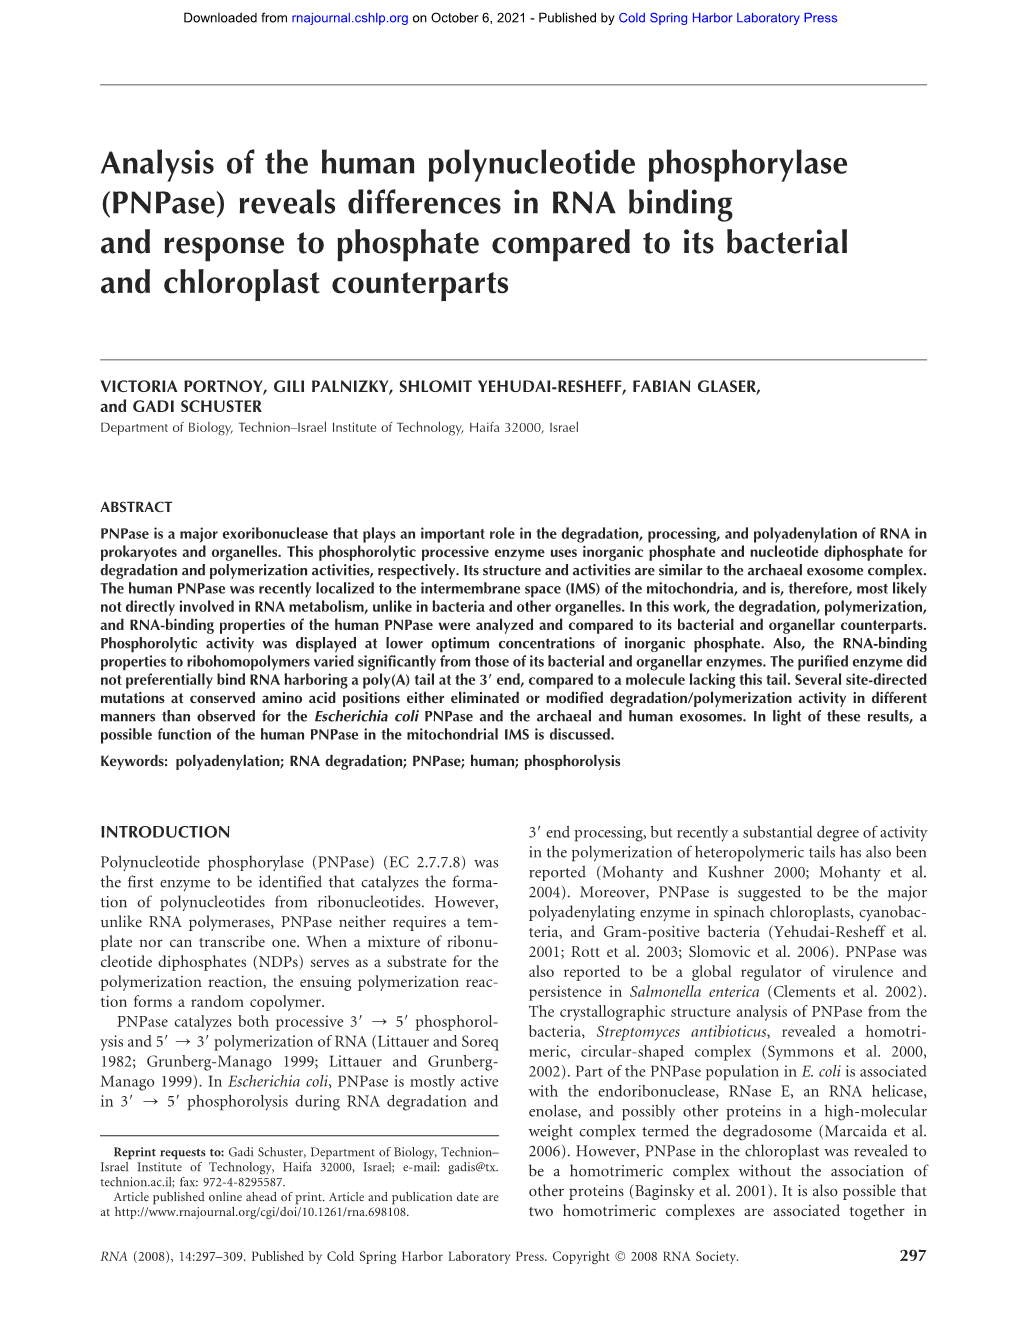 (Pnpase) Reveals Differences in RNA Binding and Response to Phosphate Compared to Its Bacterial and Chloroplast Counterparts